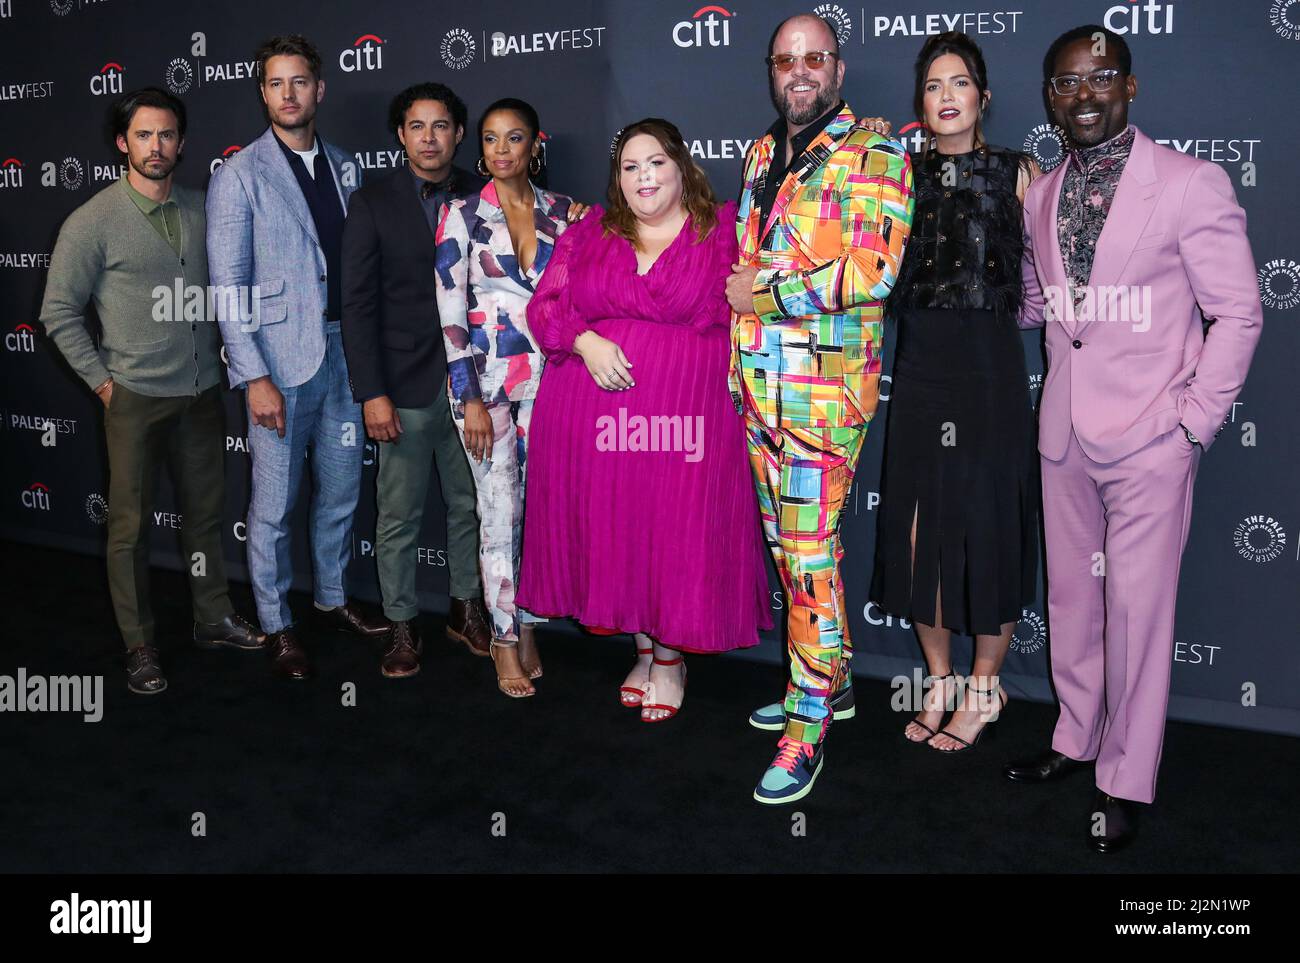 Hollywood, United States. 02nd Apr, 2022. HOLLYWOOD, LOS ANGELES, CALIFORNIA, USA - APRIL 02: Milo Ventimiglia, Justin Hartley, Jon Huertas, Susan Kelechi Watson, Chrissy Metz, Chris Sullivan, Mandy Moore and Sterling K. Brown arrive at the 2022 PaleyFest LA - NBC's 'This Is Us' held at the Dolby Theatre on April 2, 2022 in Hollywood, Los Angeles, California, United States. (Photo by Xavier Collin/Image Press Agency) Credit: Image Press Agency/Alamy Live News Stock Photo